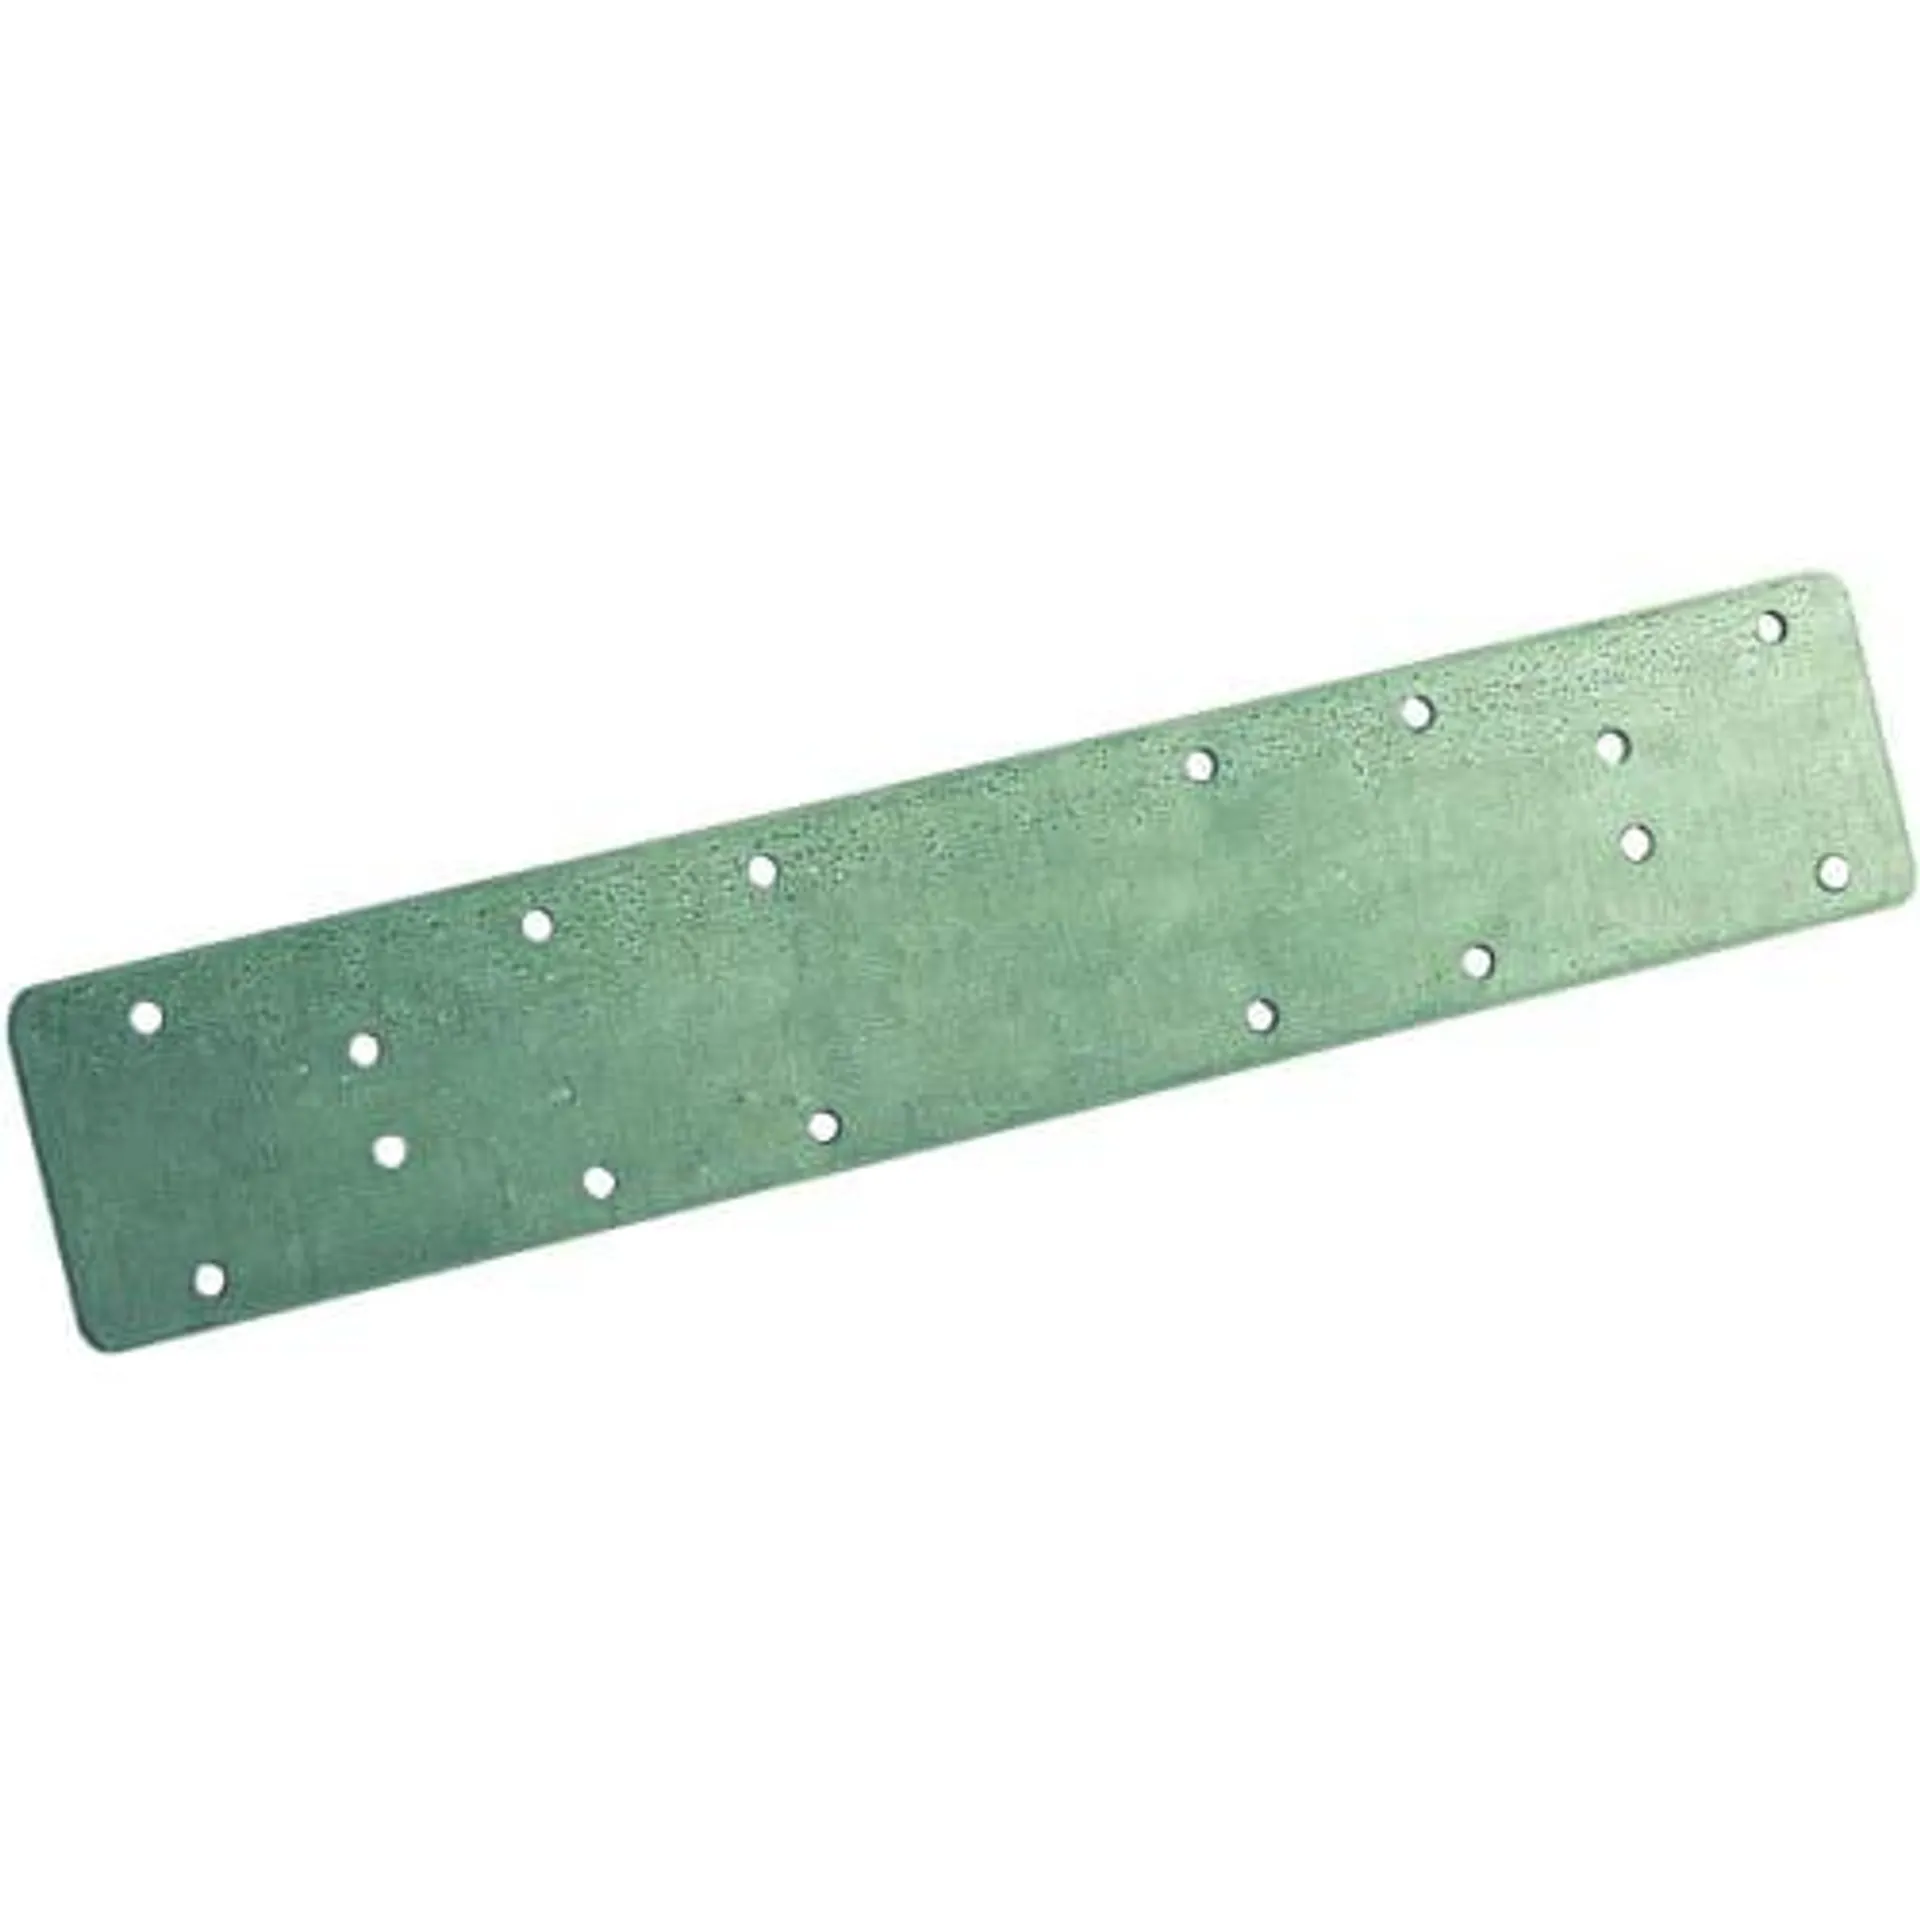 Wickes Galvanised Jointing Flat Plate 63x300mm